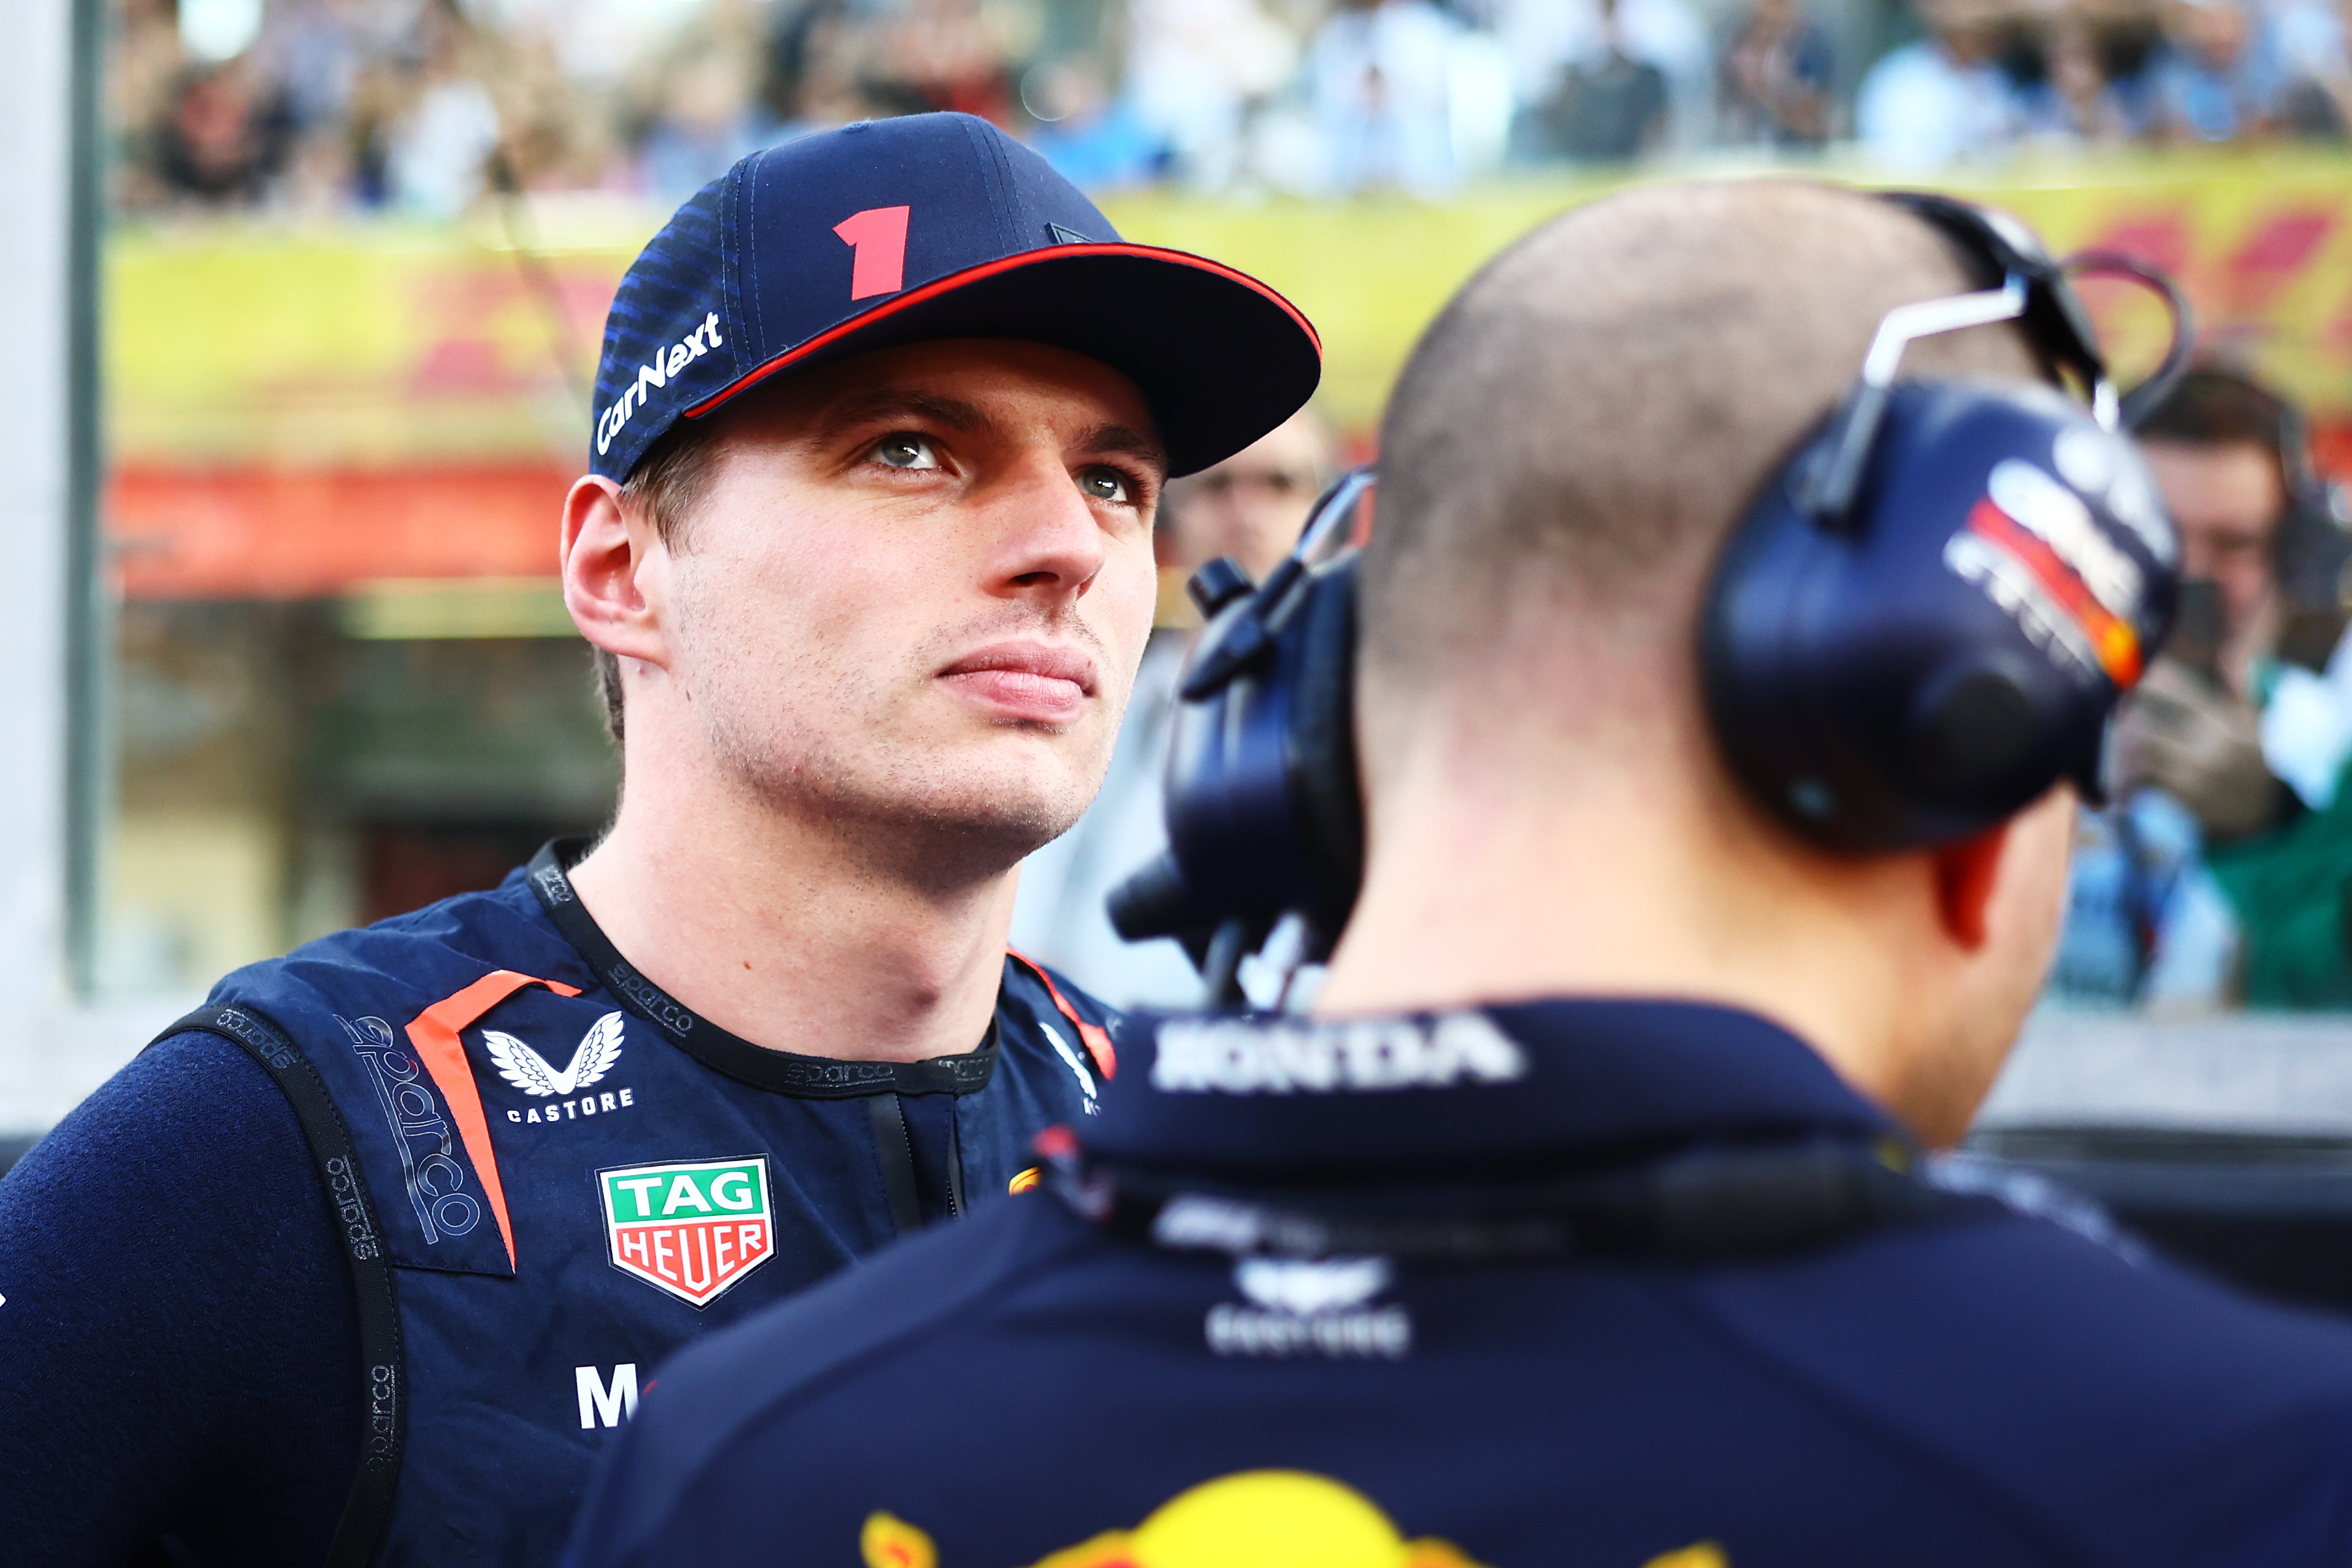 Max Verstappen would like to compete in the 24 Hours of Le Mans event in the future